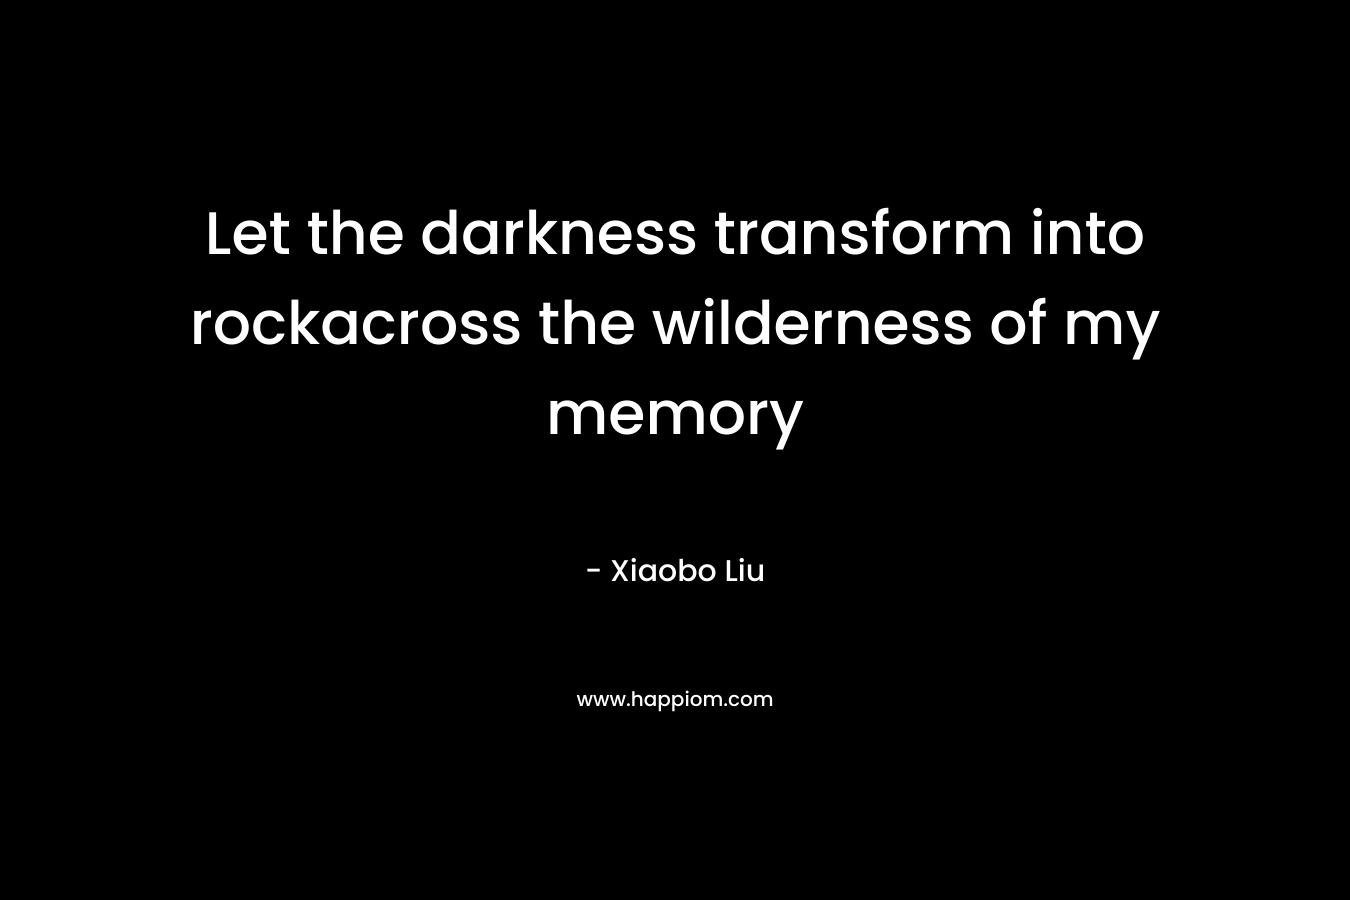 Let the darkness transform into rockacross the wilderness of my memory – Xiaobo Liu